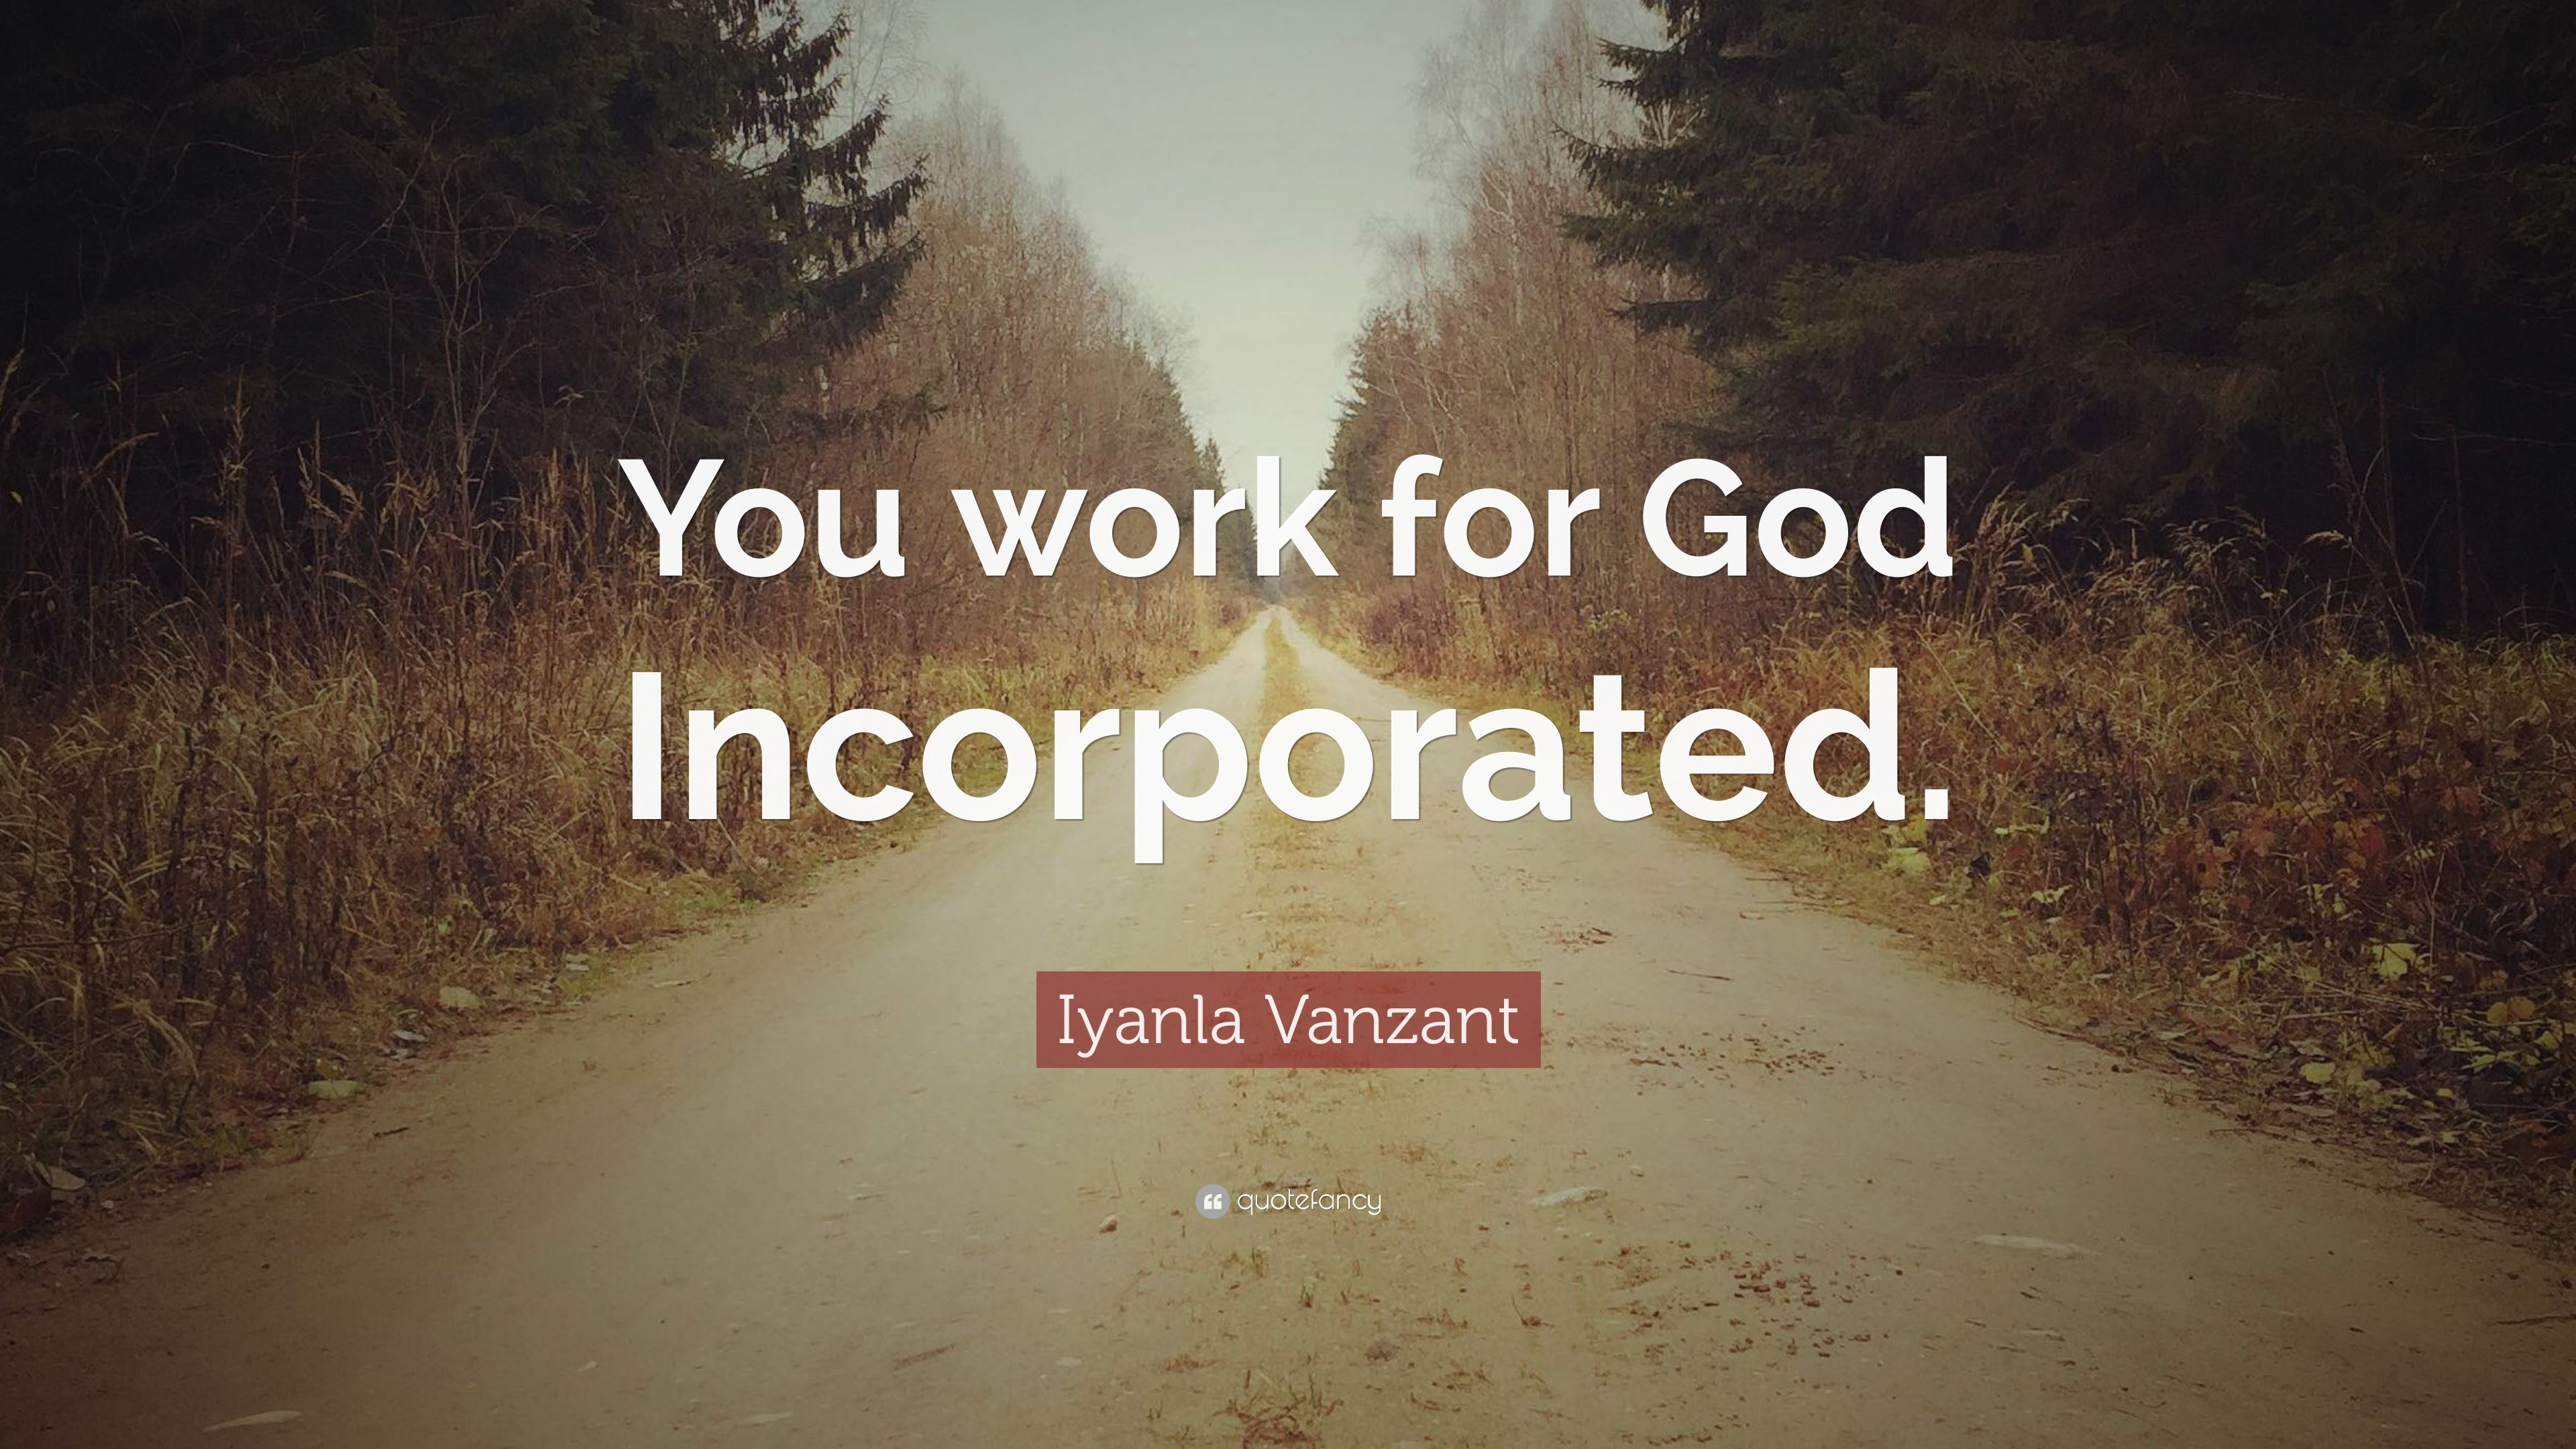 Iyanla Vanzant Quote: “You work for God Incorporated.” (10 wallpaper)